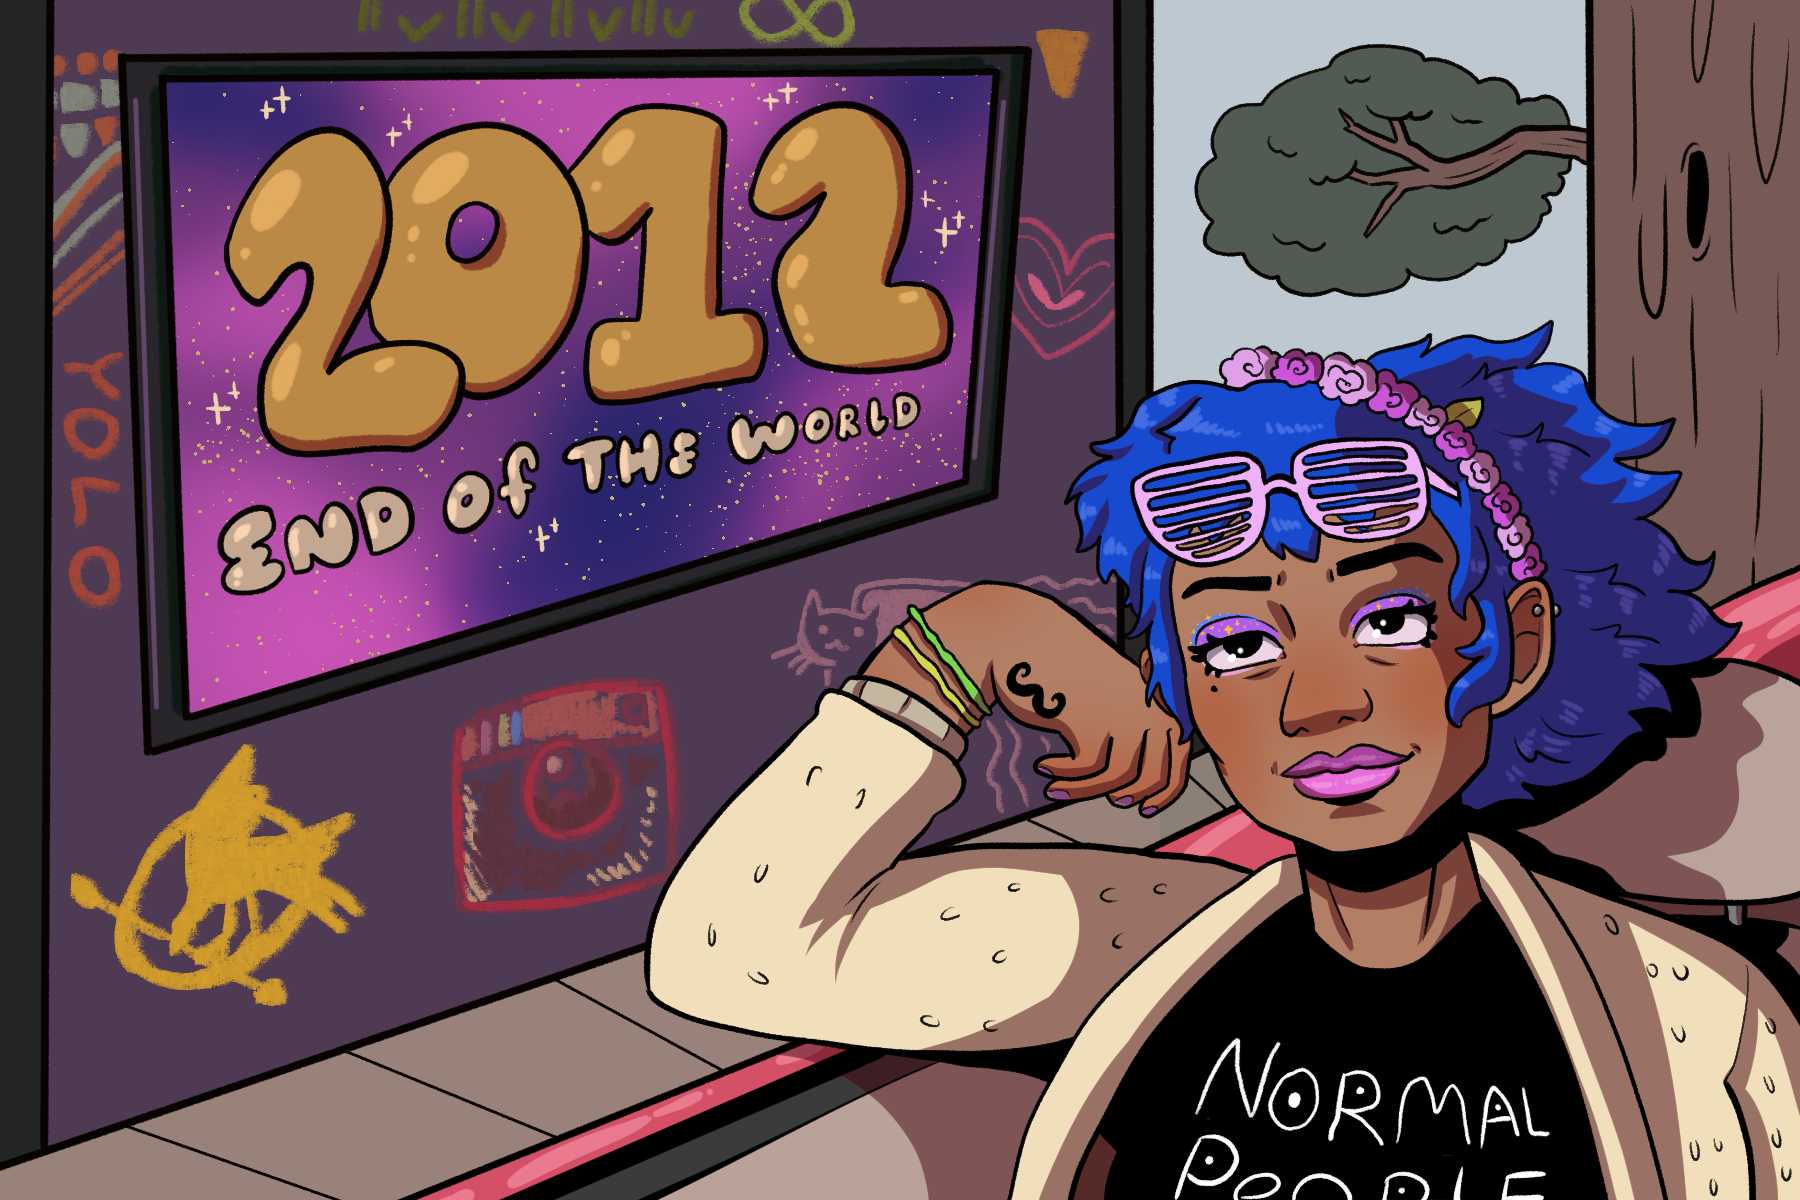 In an article about 2012 pop music, a blue-haired girl wearing early 2010s fashion rides in a car down a street. A billboard reads "2012: end of the world."